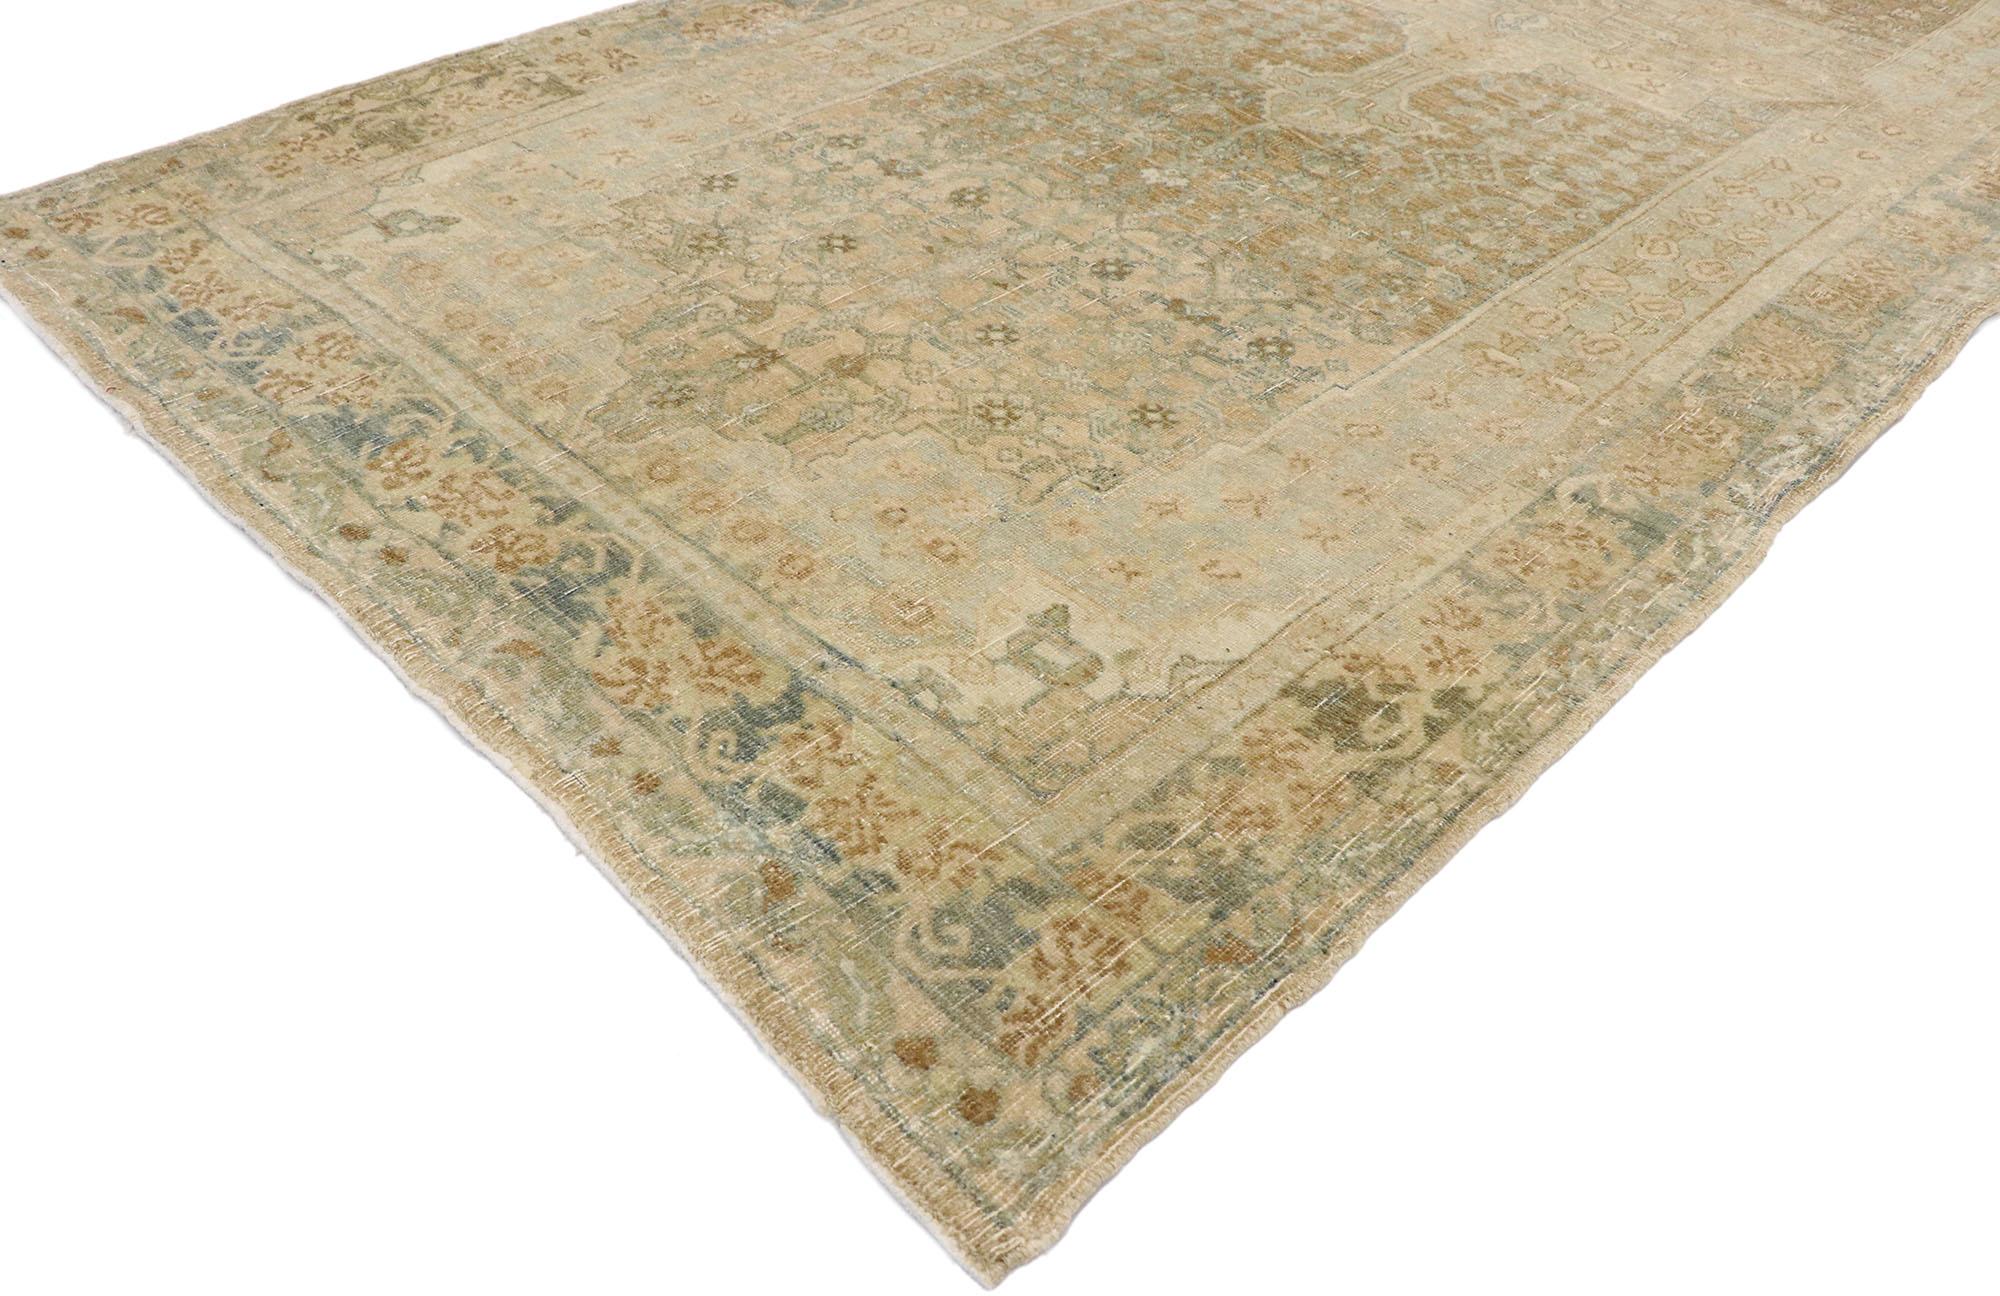 Malayer Distressed Antique Persian Bijar Runner with Modern Rustic Shaker Style For Sale